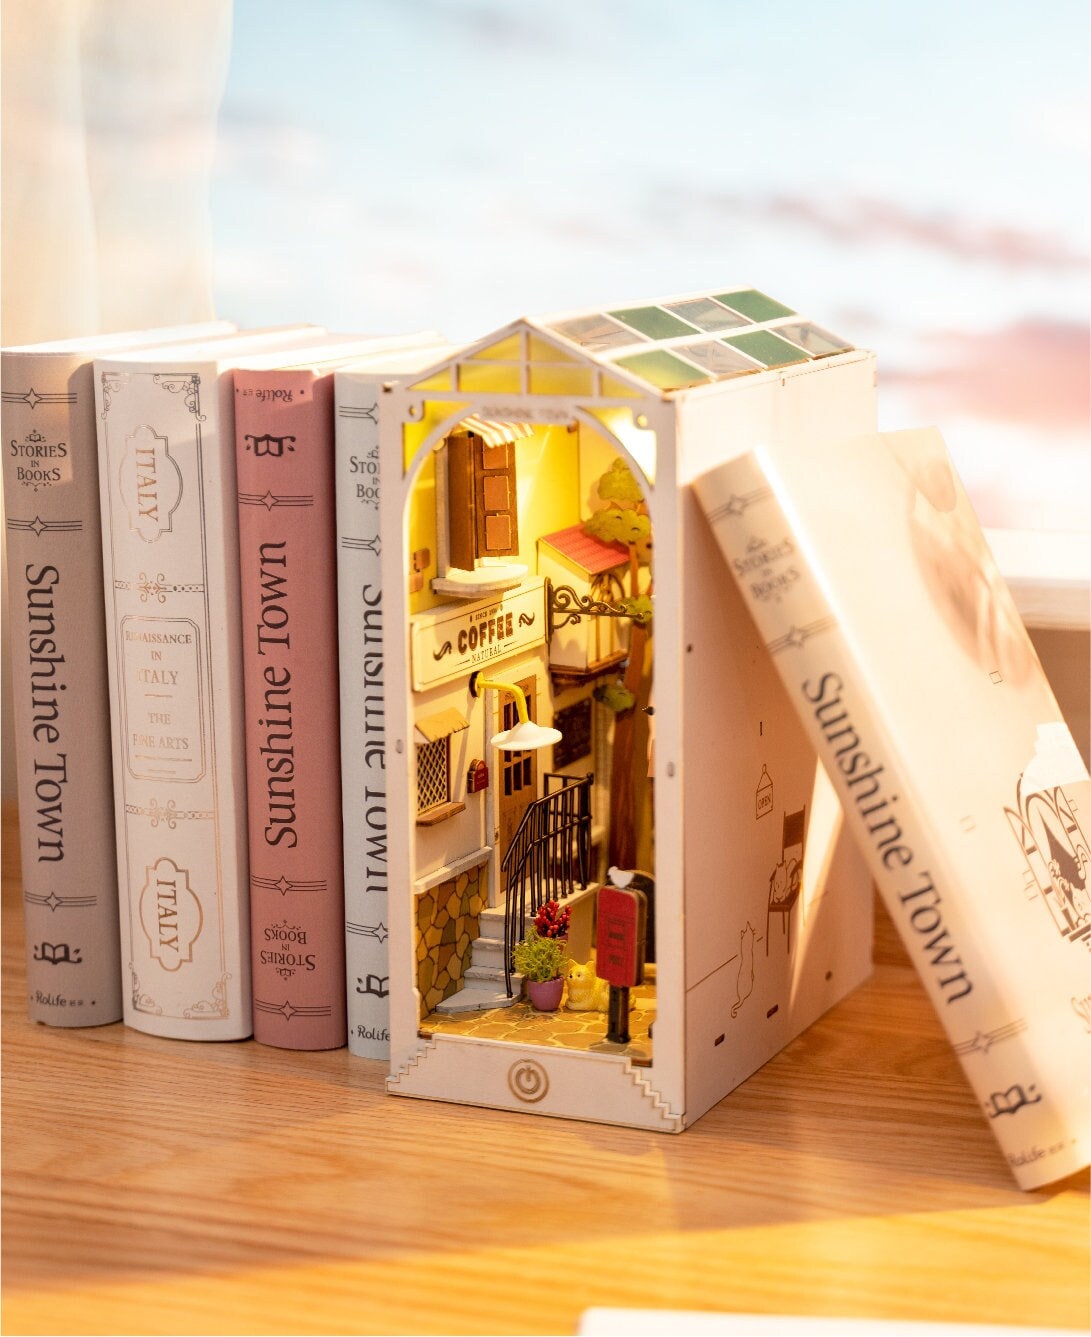 Build Your Own Book Nook, Doll House DIY Kit, Model Set, Miniature Book Nook Craft Kit for Adults, Mini Diorama Room, Sunshine Town